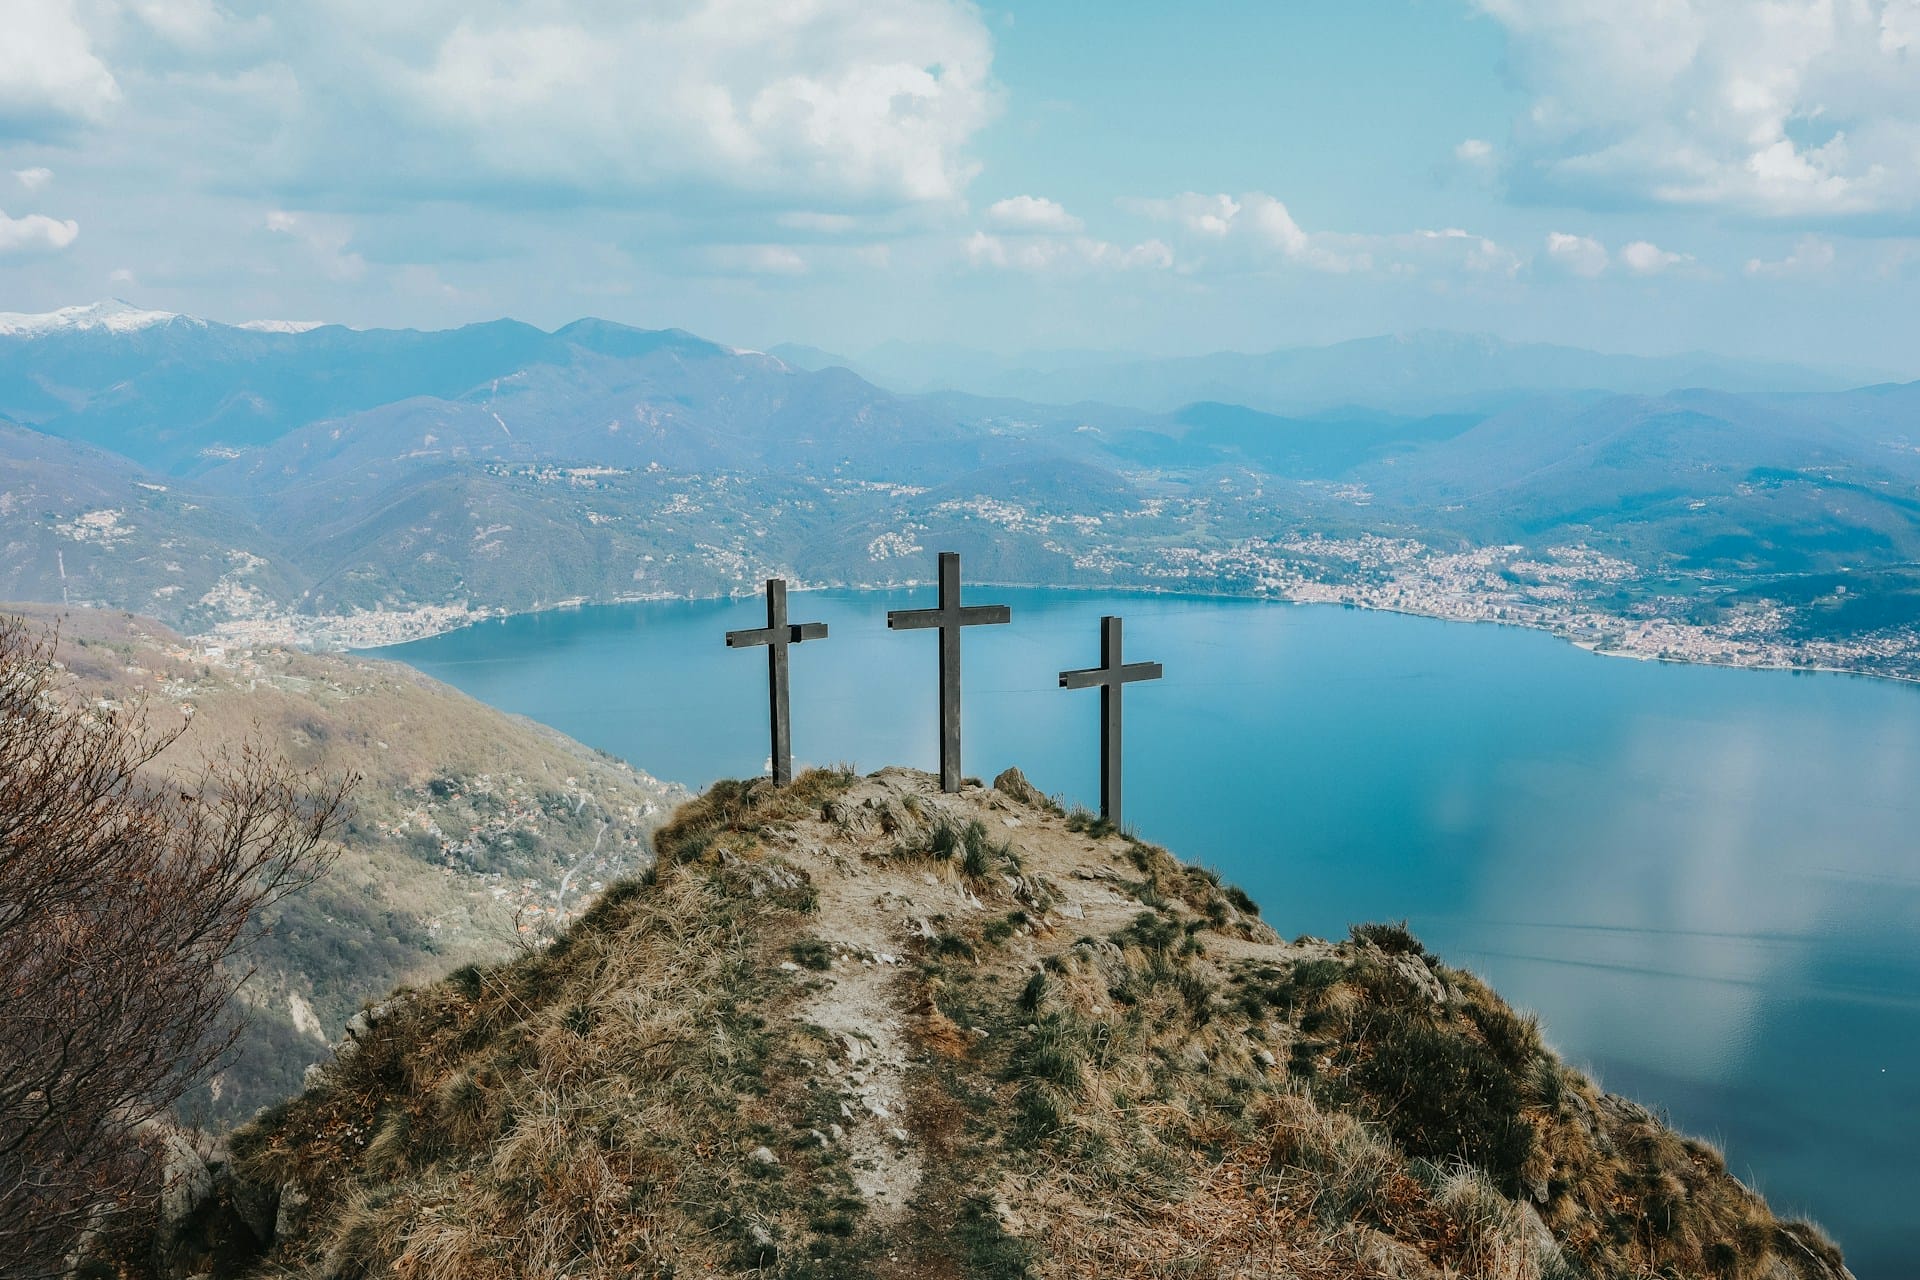 What is Good Friday? This article explores that excellent question!